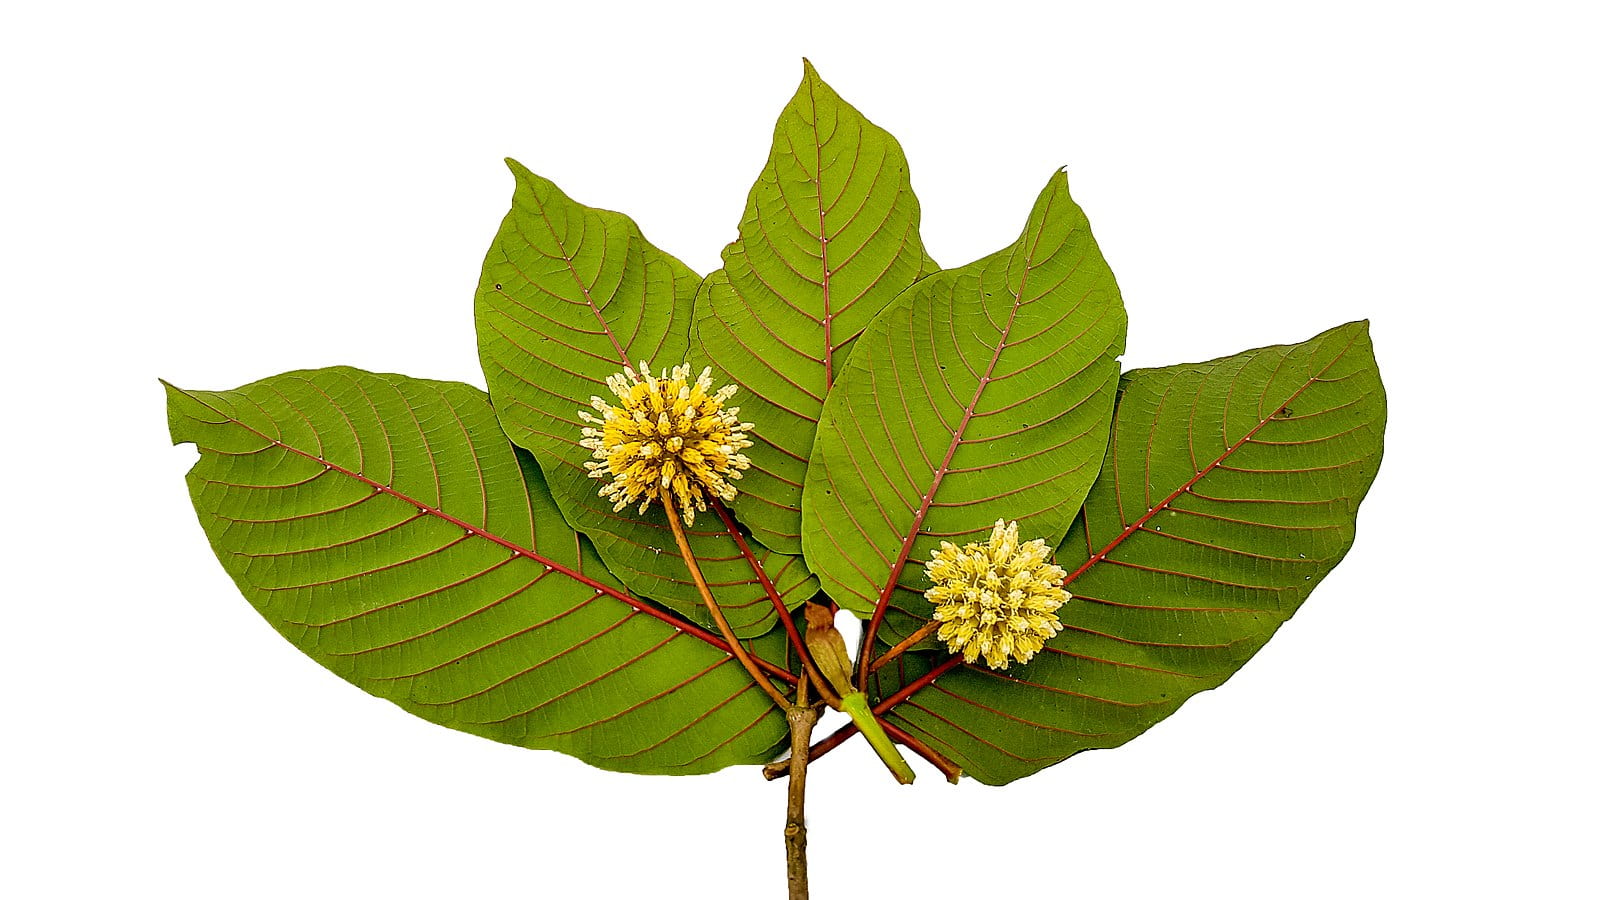 Image showing the large, broad, green leaves of the mitragyna speciosa (kratom) plant.